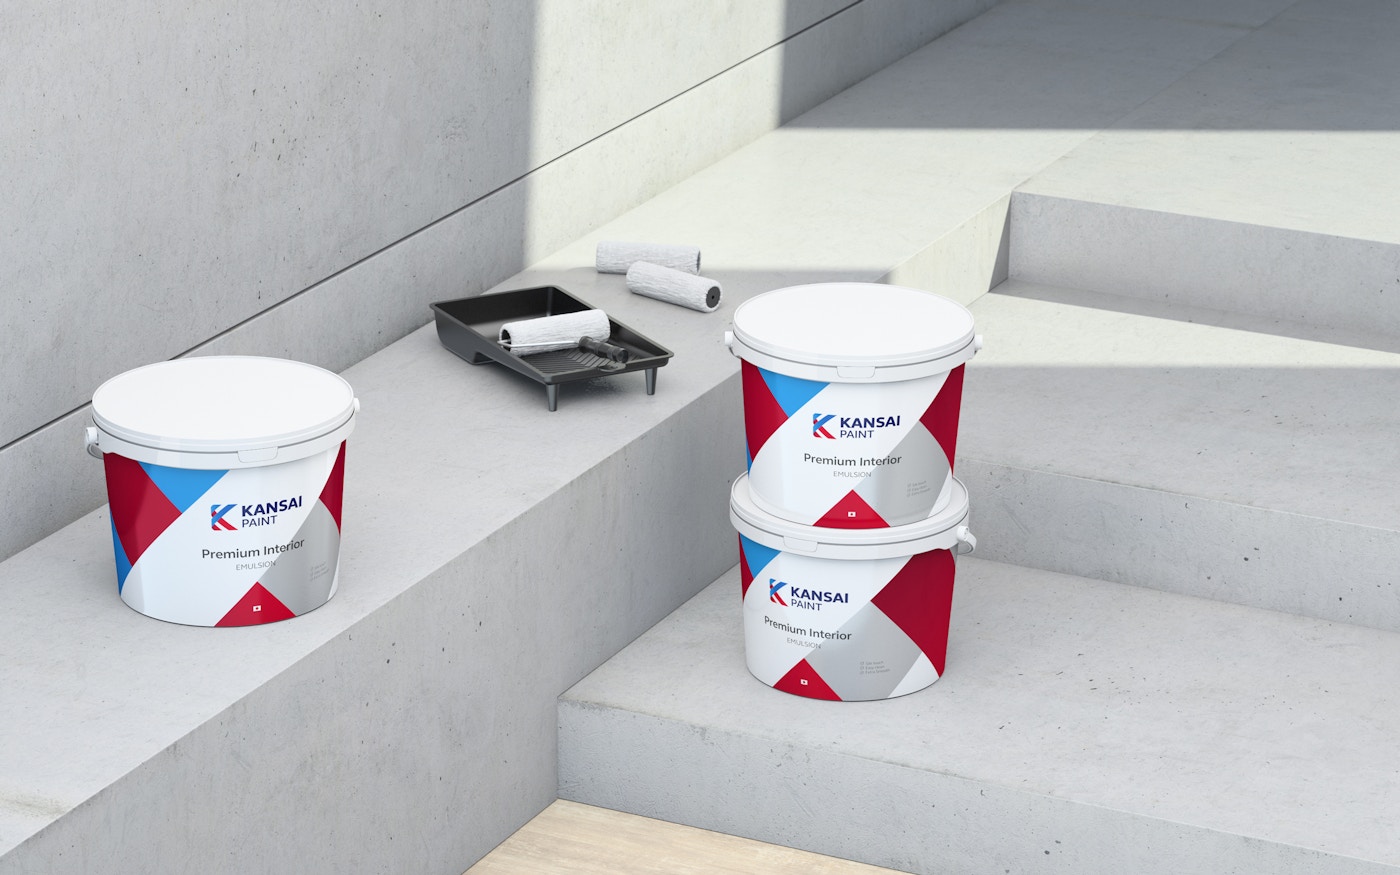 Kansai paint branded containers